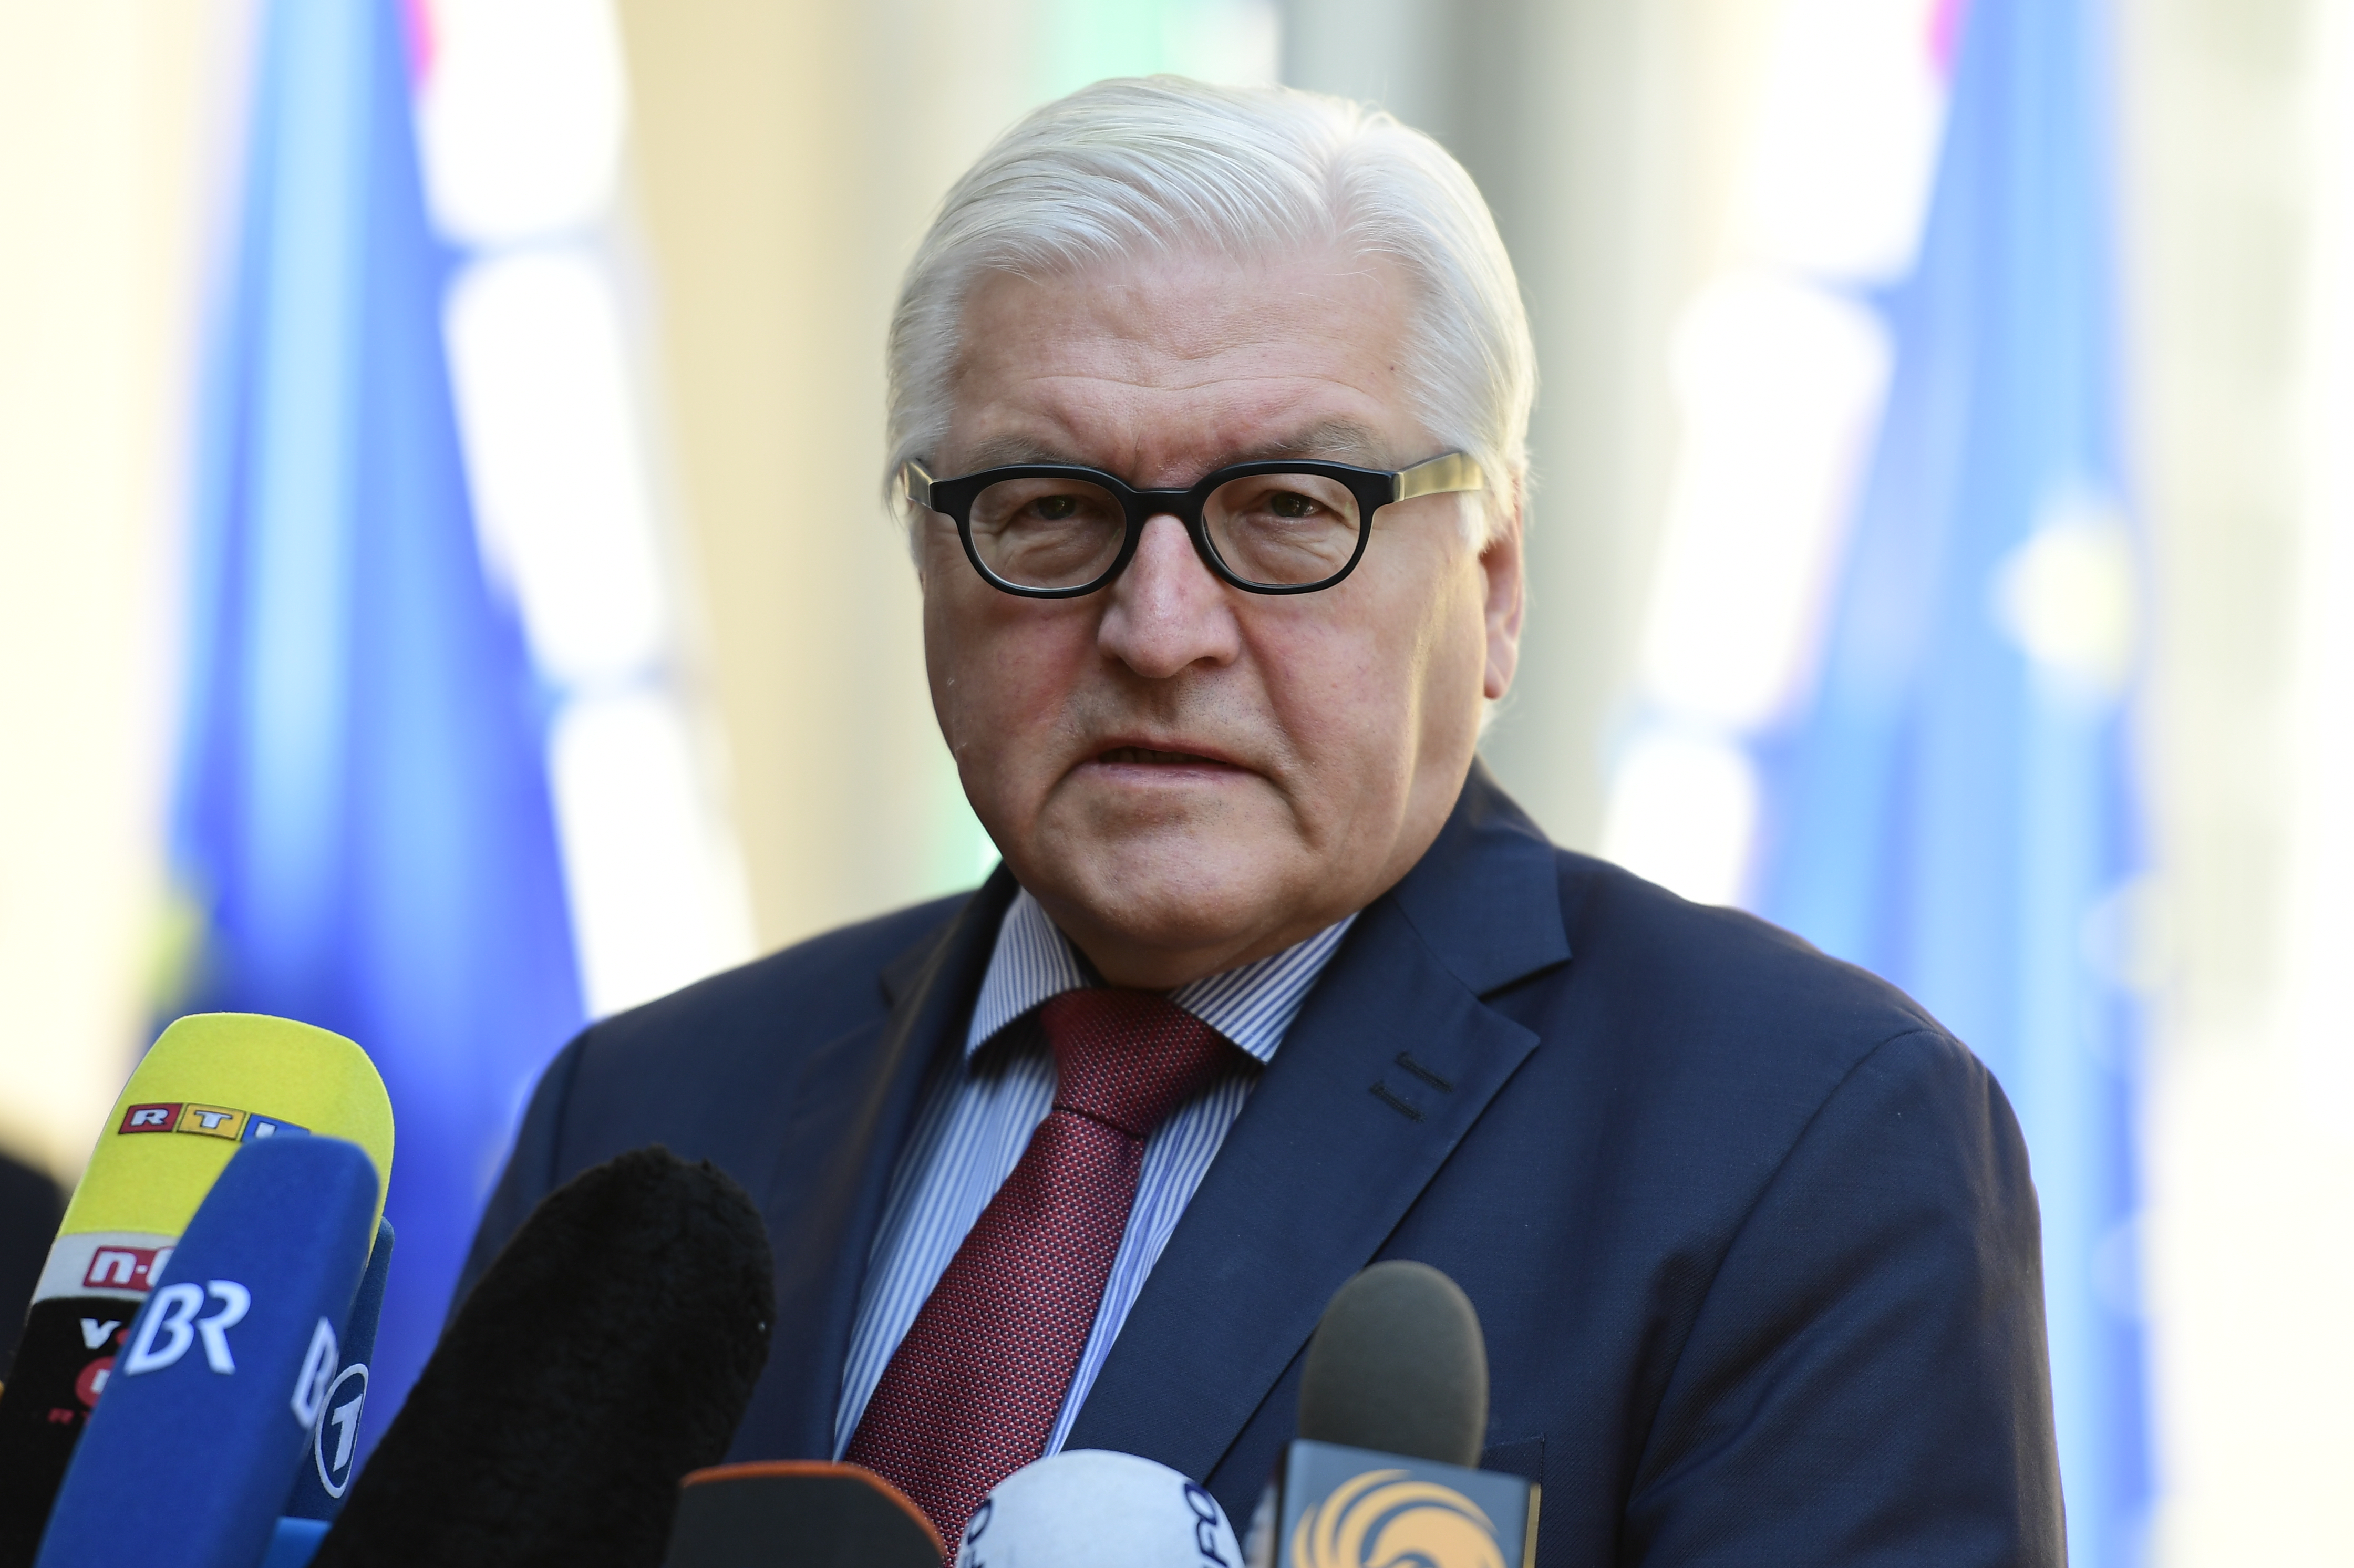 Germany's Foreign minister Frank-Walter Steinmeier addresses journalists before welcoming EU founding states' Foreign Ministers to hold post-Brexit talks at the Villa Borsig in Berlin on June 25, 2016. Foreign ministers of the six founding members of the European project meet to discuss the bloc's future in the wake of Britain's decision to leave.   / AFP PHOTO / John MACDOUGALL